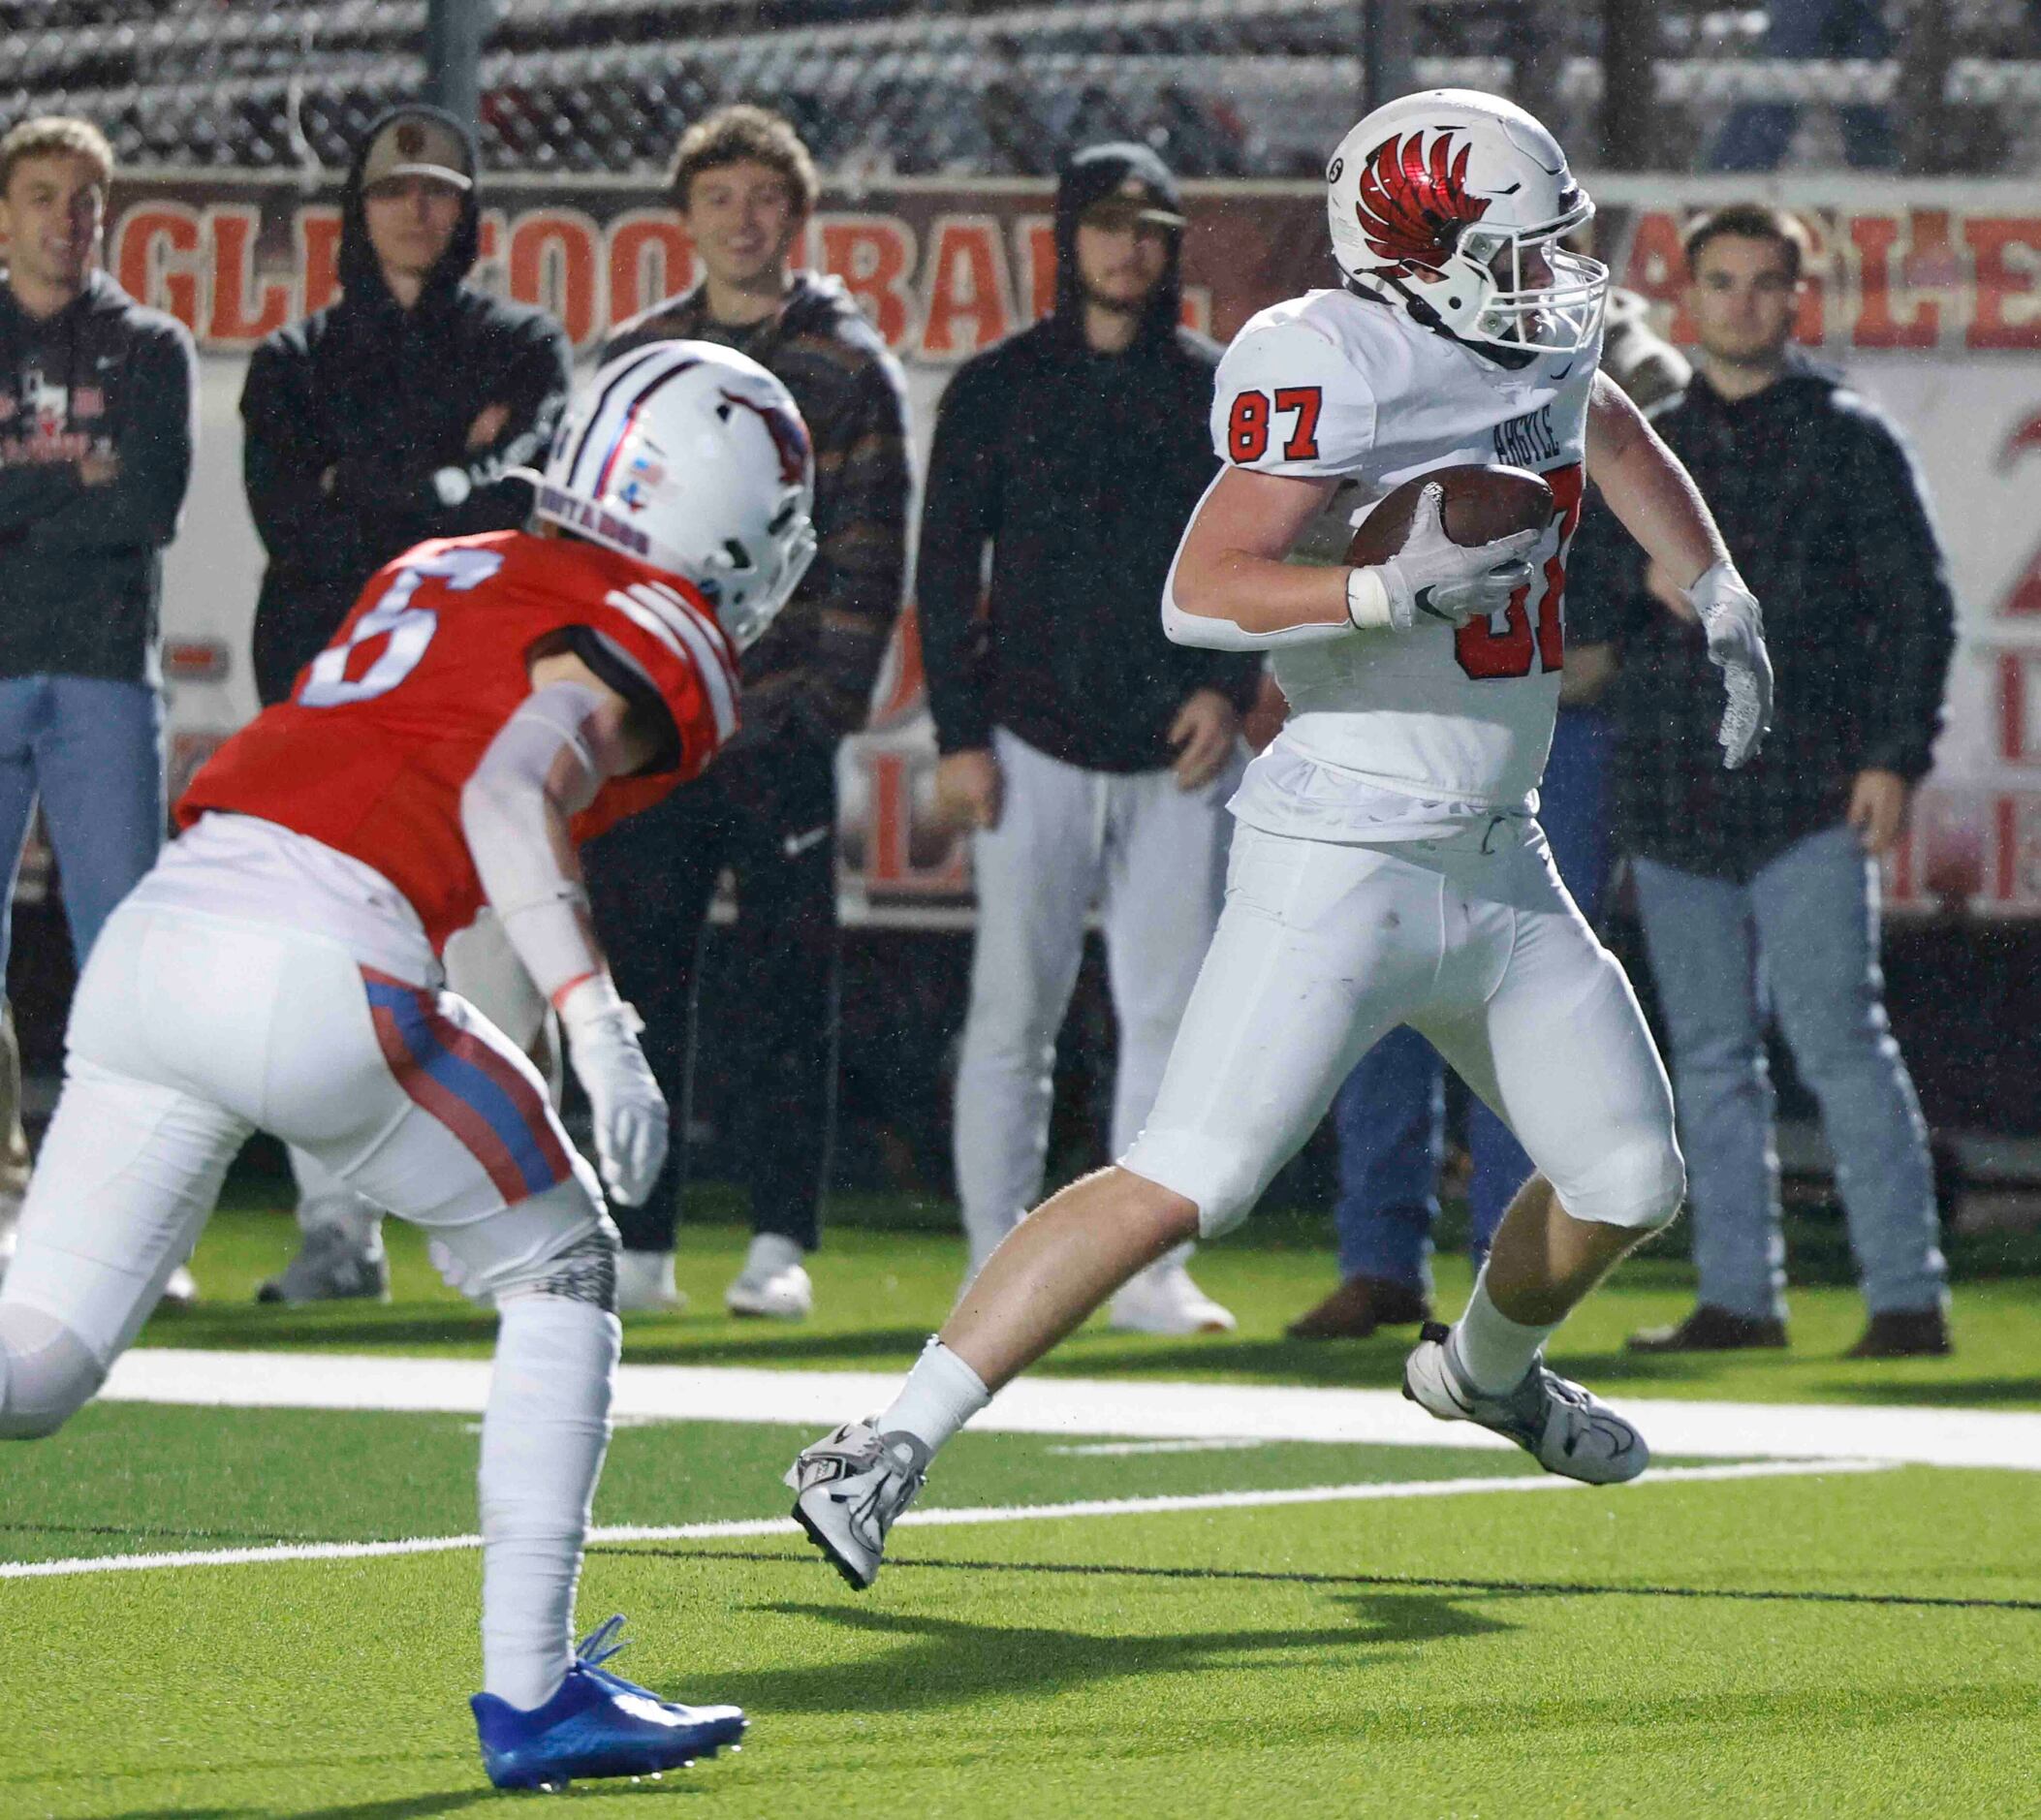 Argyle High’s Hunter McFaul (87), right, competes a touchdown past Grapevine’s Victor Deal...